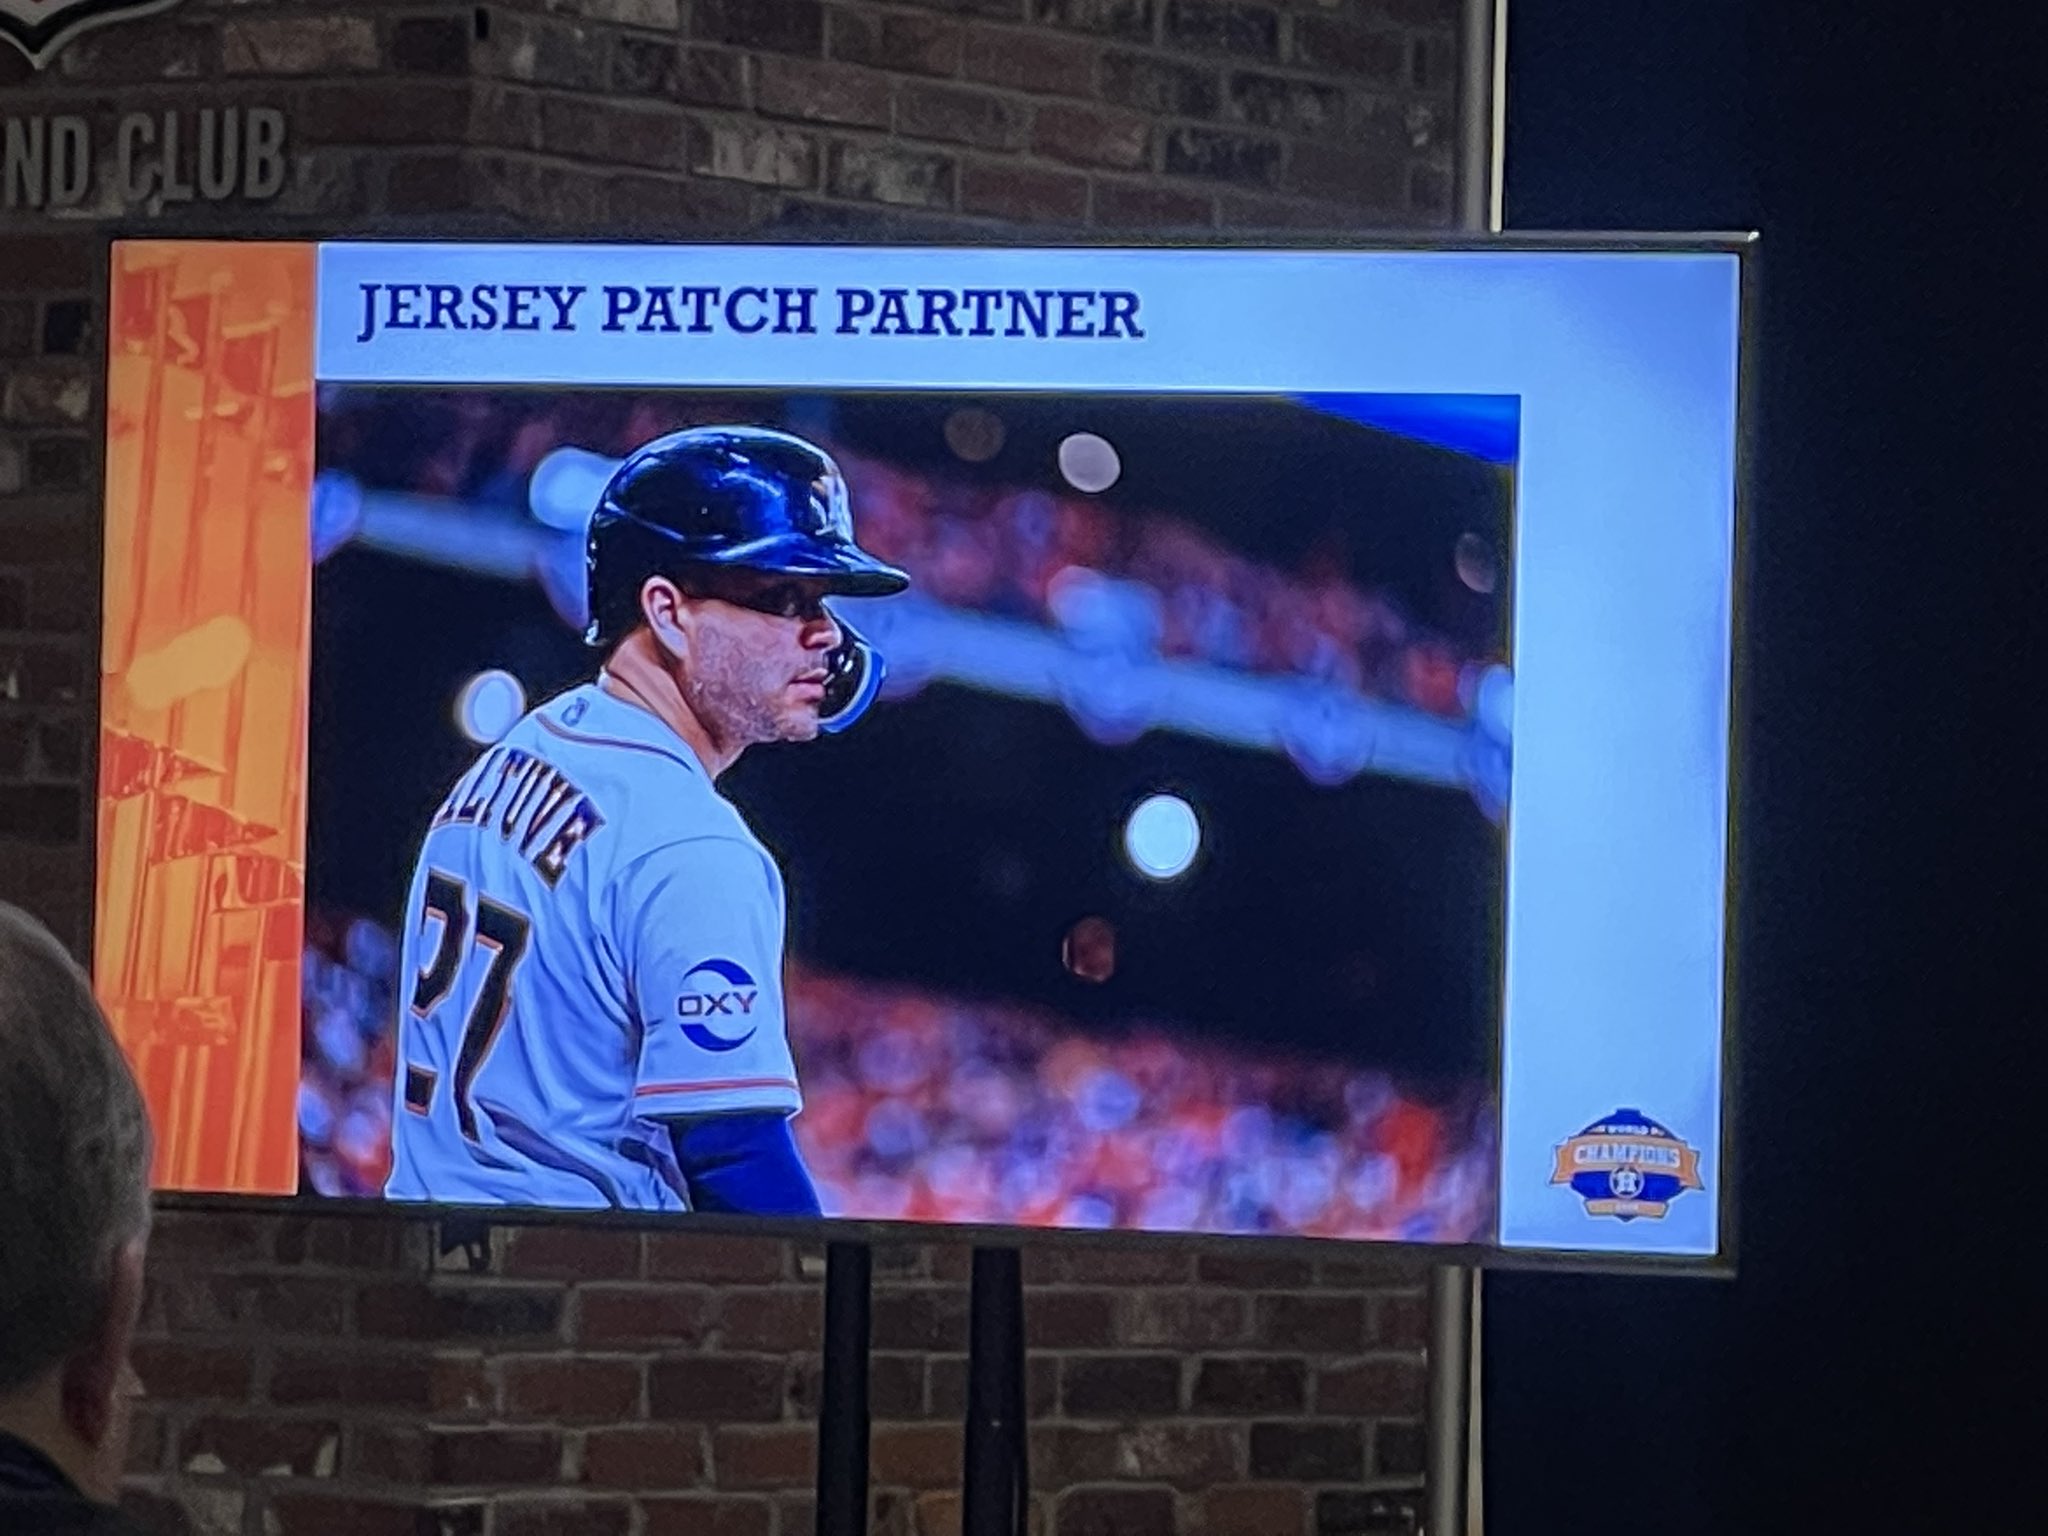 Jose de Jesus Ortiz on X: The @astros' inaugural patch partner will be  Occidental Petroleum, Oxy. The Astros will wear @WeAreOxy patches with the  company's red and blue colors all season. The